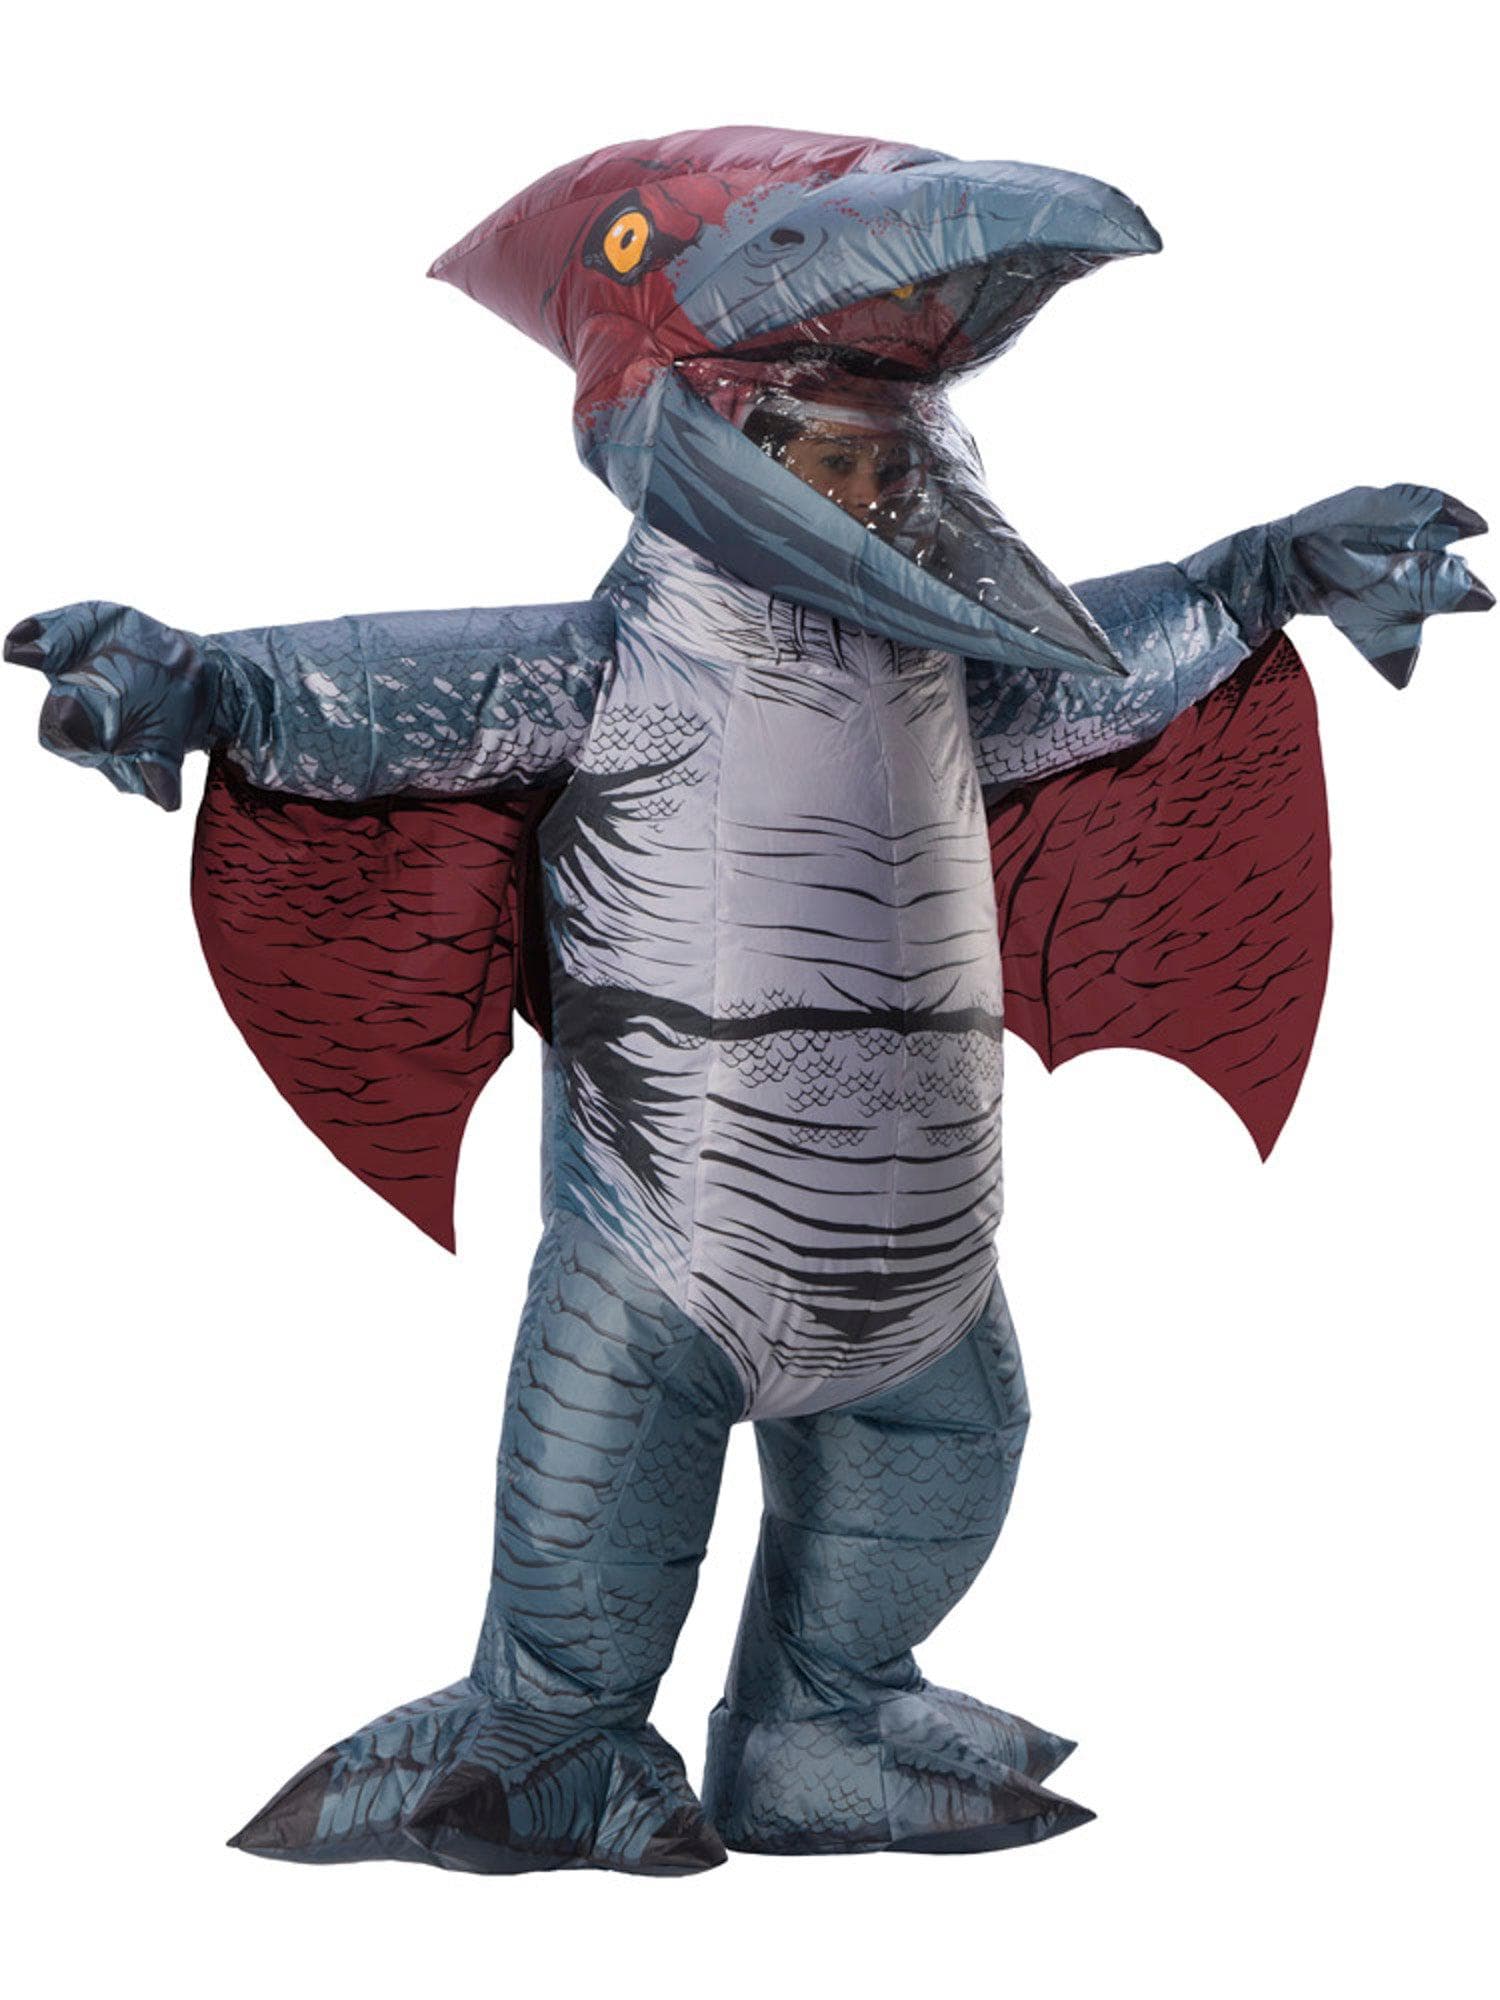 Adult Inflatable Pteranodon Costume - costumes.com